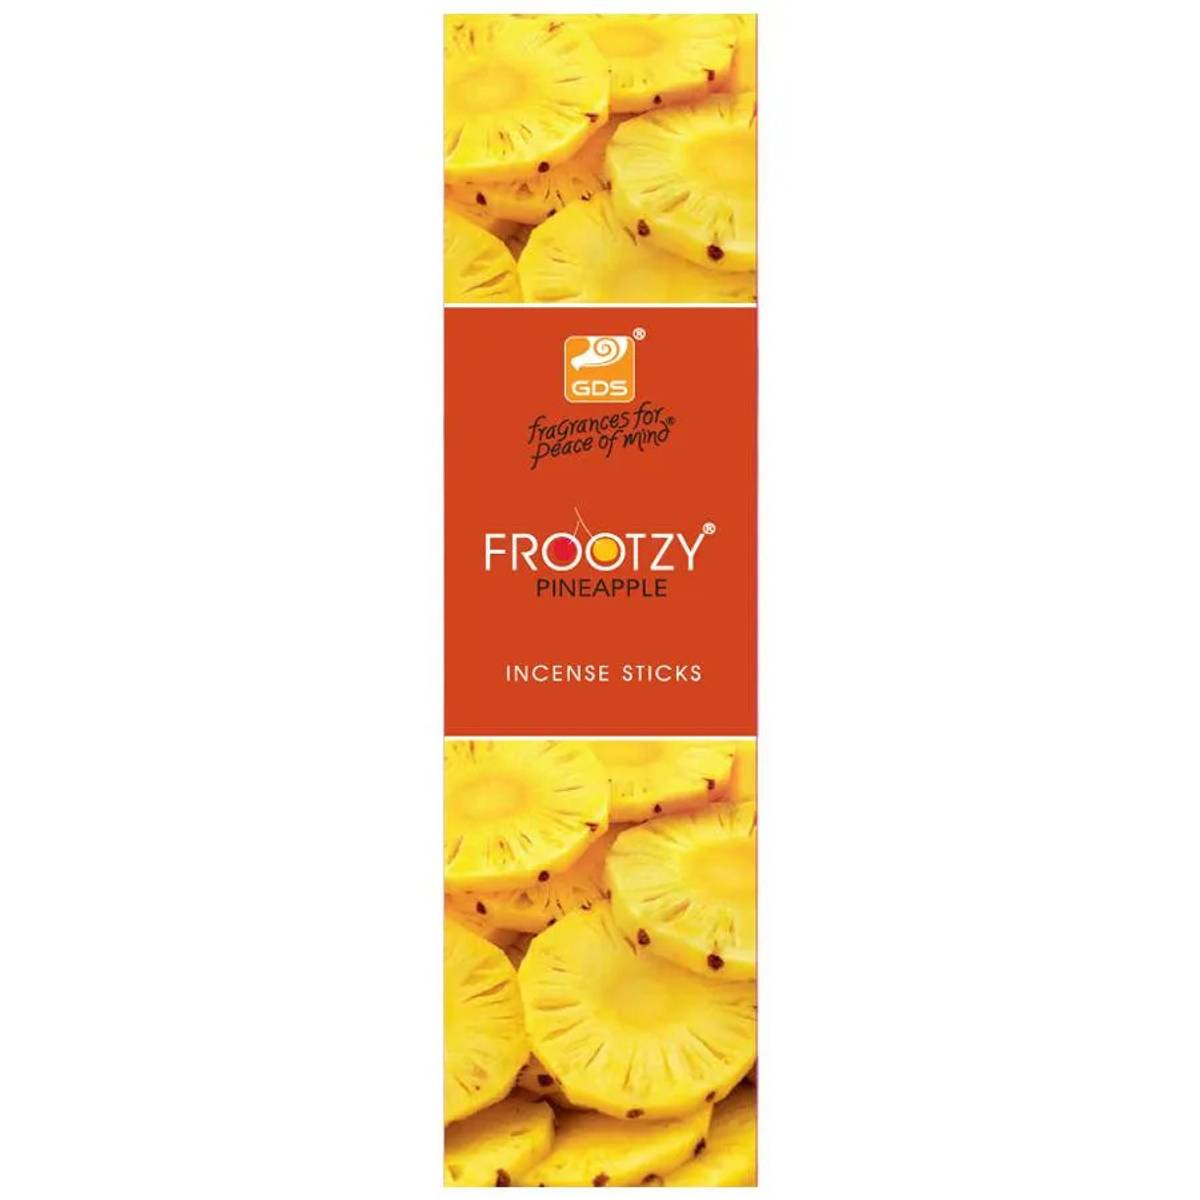 GDS Frootzy Pineapple